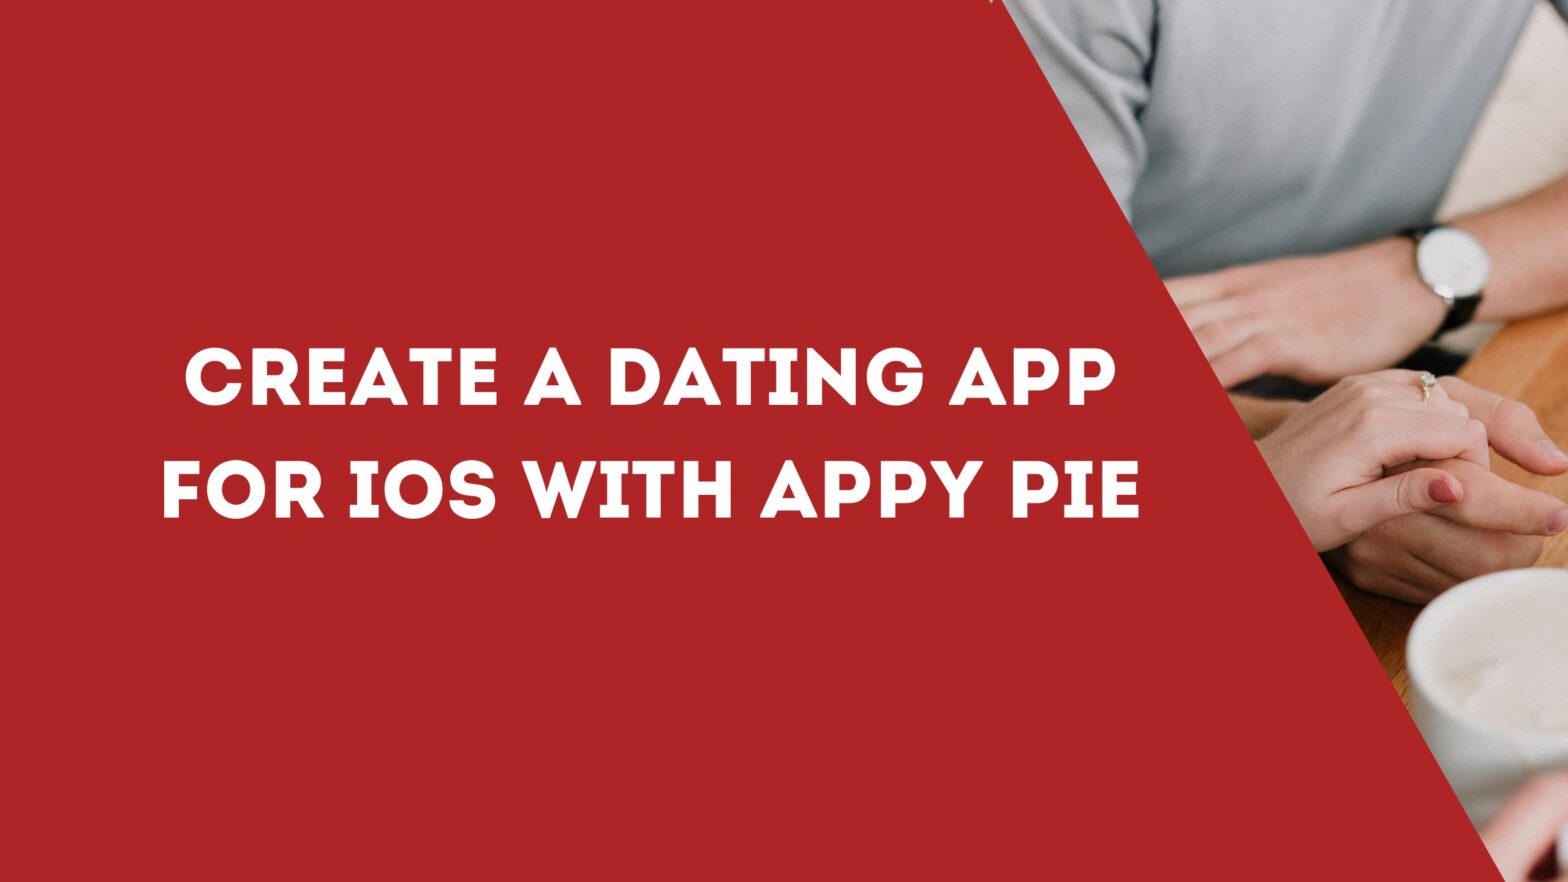 Create a Dating App for iOS with Appy Pie